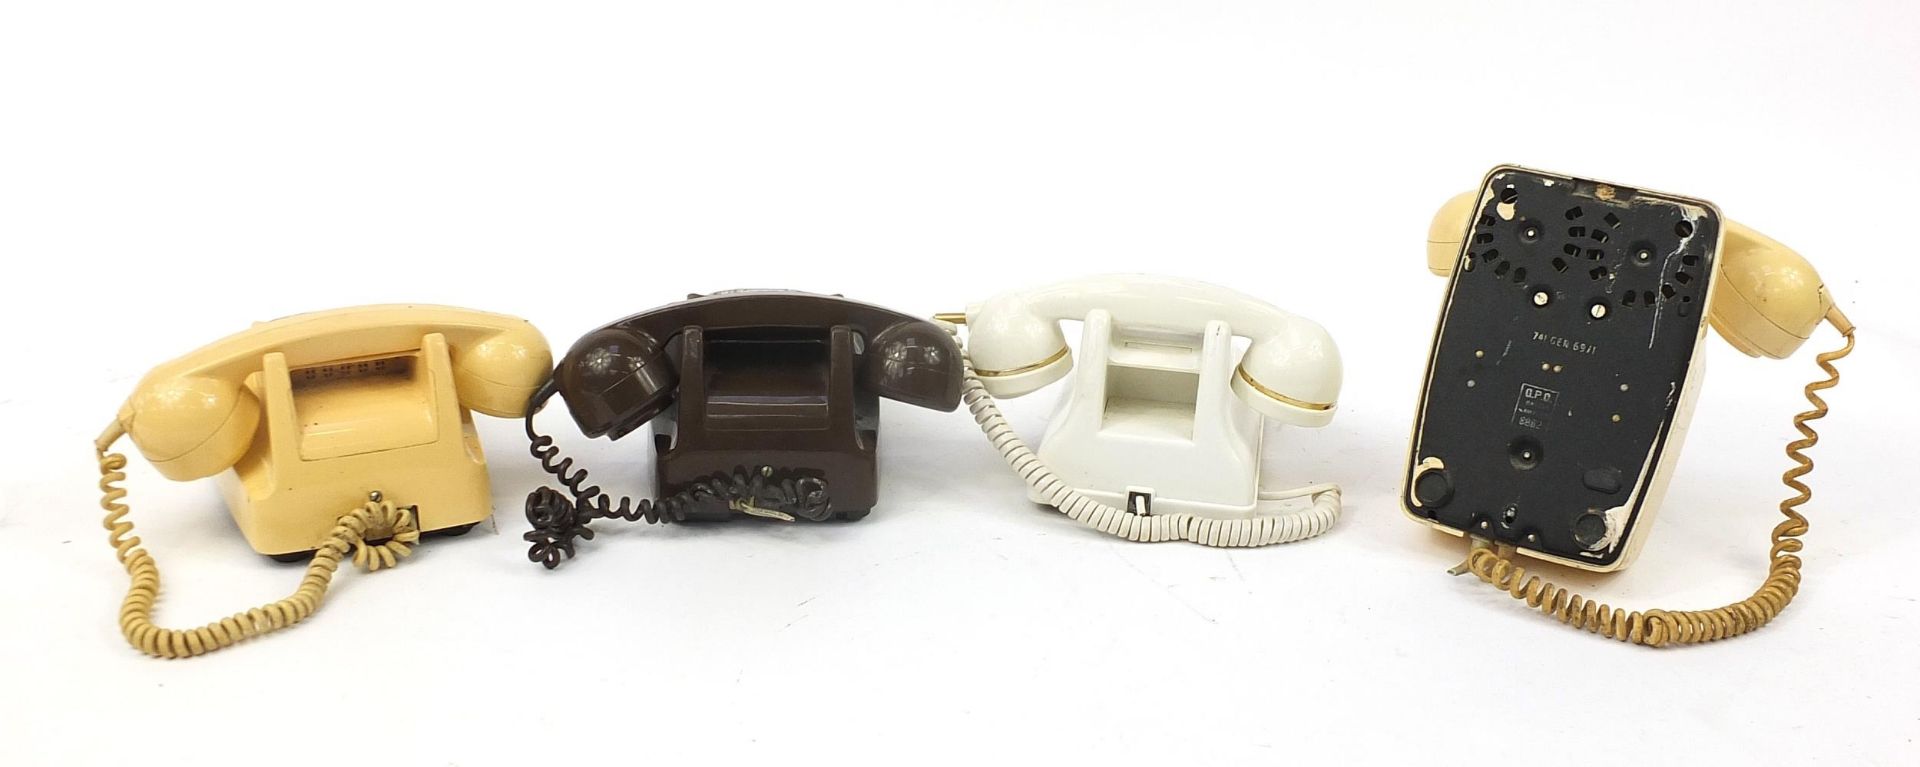 Four vintage dial telephones including two cream Bakelite examples - Image 2 of 3